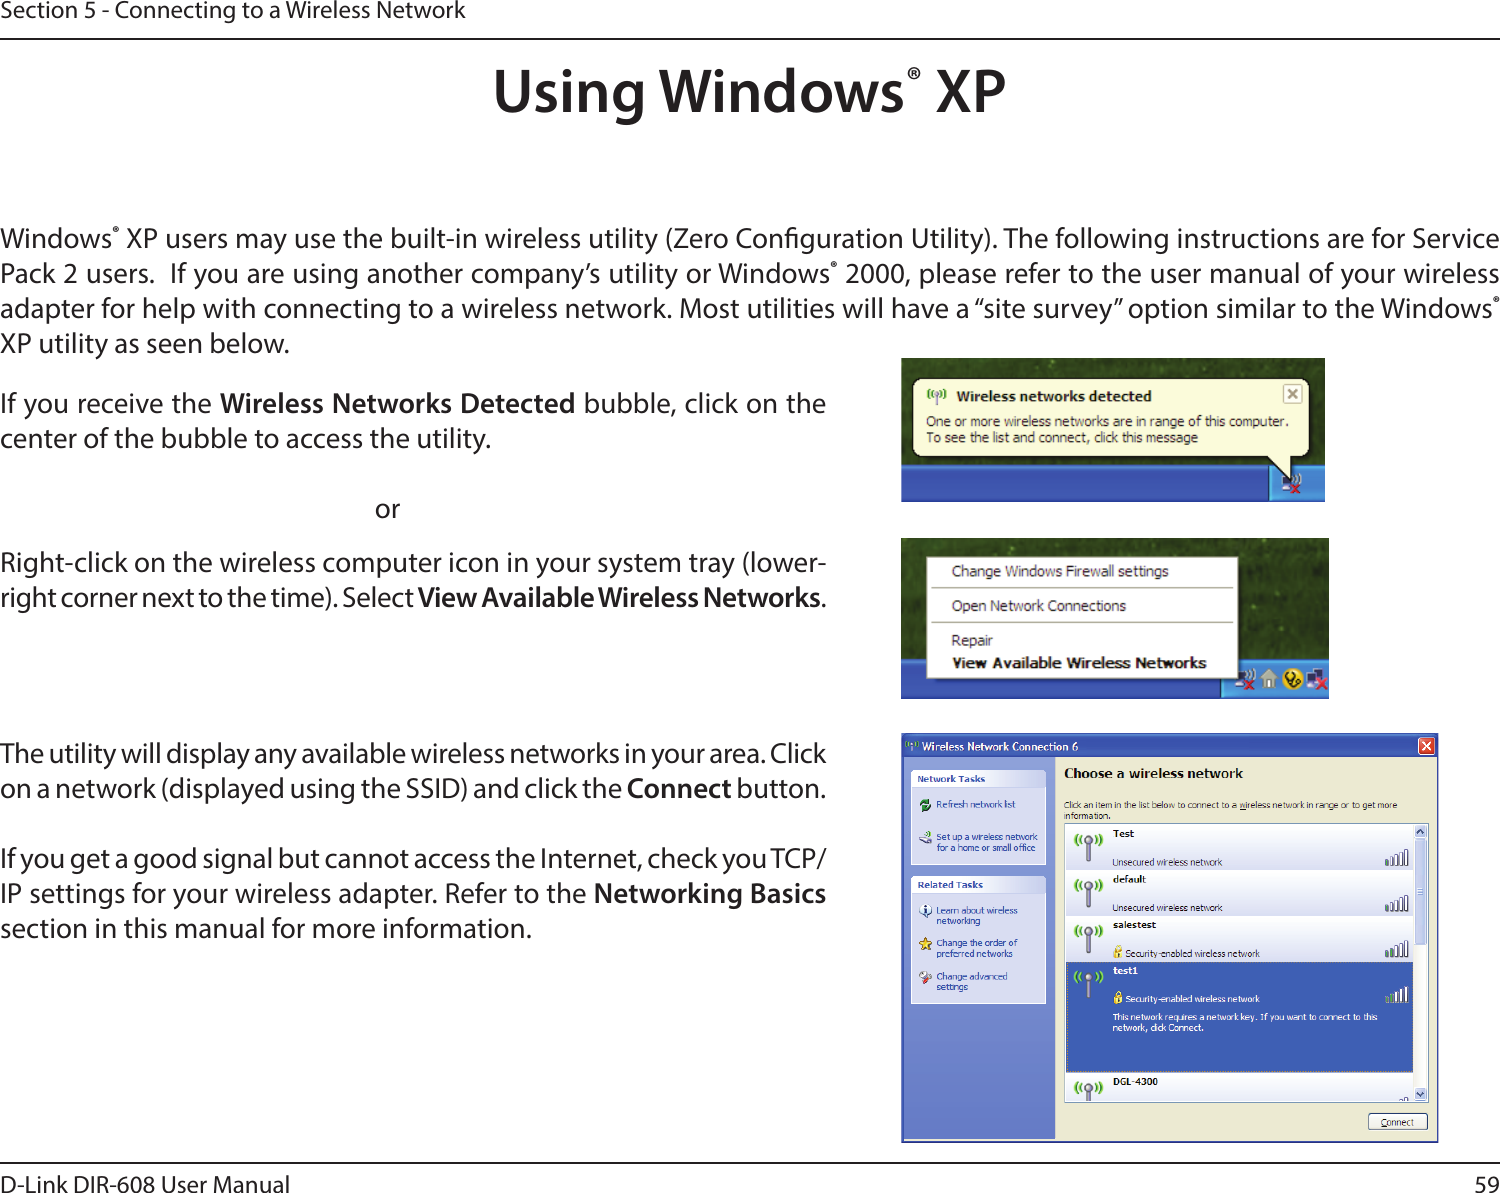 59D-Link DIR-608 User ManualSection 5 - Connecting to a Wireless NetworkUsing Windows® XPWindows® XP users may use the built-in wireless utility (Zero Conguration Utility). The following instructions are for Service Pack 2 users.  If you are using another company’s utility or Windows® 2000, please refer to the user manual of your wireless adapter for help with connecting to a wireless network. Most utilities will have a “site survey” option similar to the Windows® XP utility as seen below.Right-click on the wireless computer icon in your system tray (lower-right corner next to the time). Select View Available Wireless Networks.If you receive the Wireless Networks Detected bubble, click on the center of the bubble to access the utility.     orThe utility will display any available wireless networks in your area. Click on a network (displayed using the SSID) and click the Connect button.If you get a good signal but cannot access the Internet, check you TCP/IP settings for your wireless adapter. Refer to the Networking Basics section in this manual for more information.